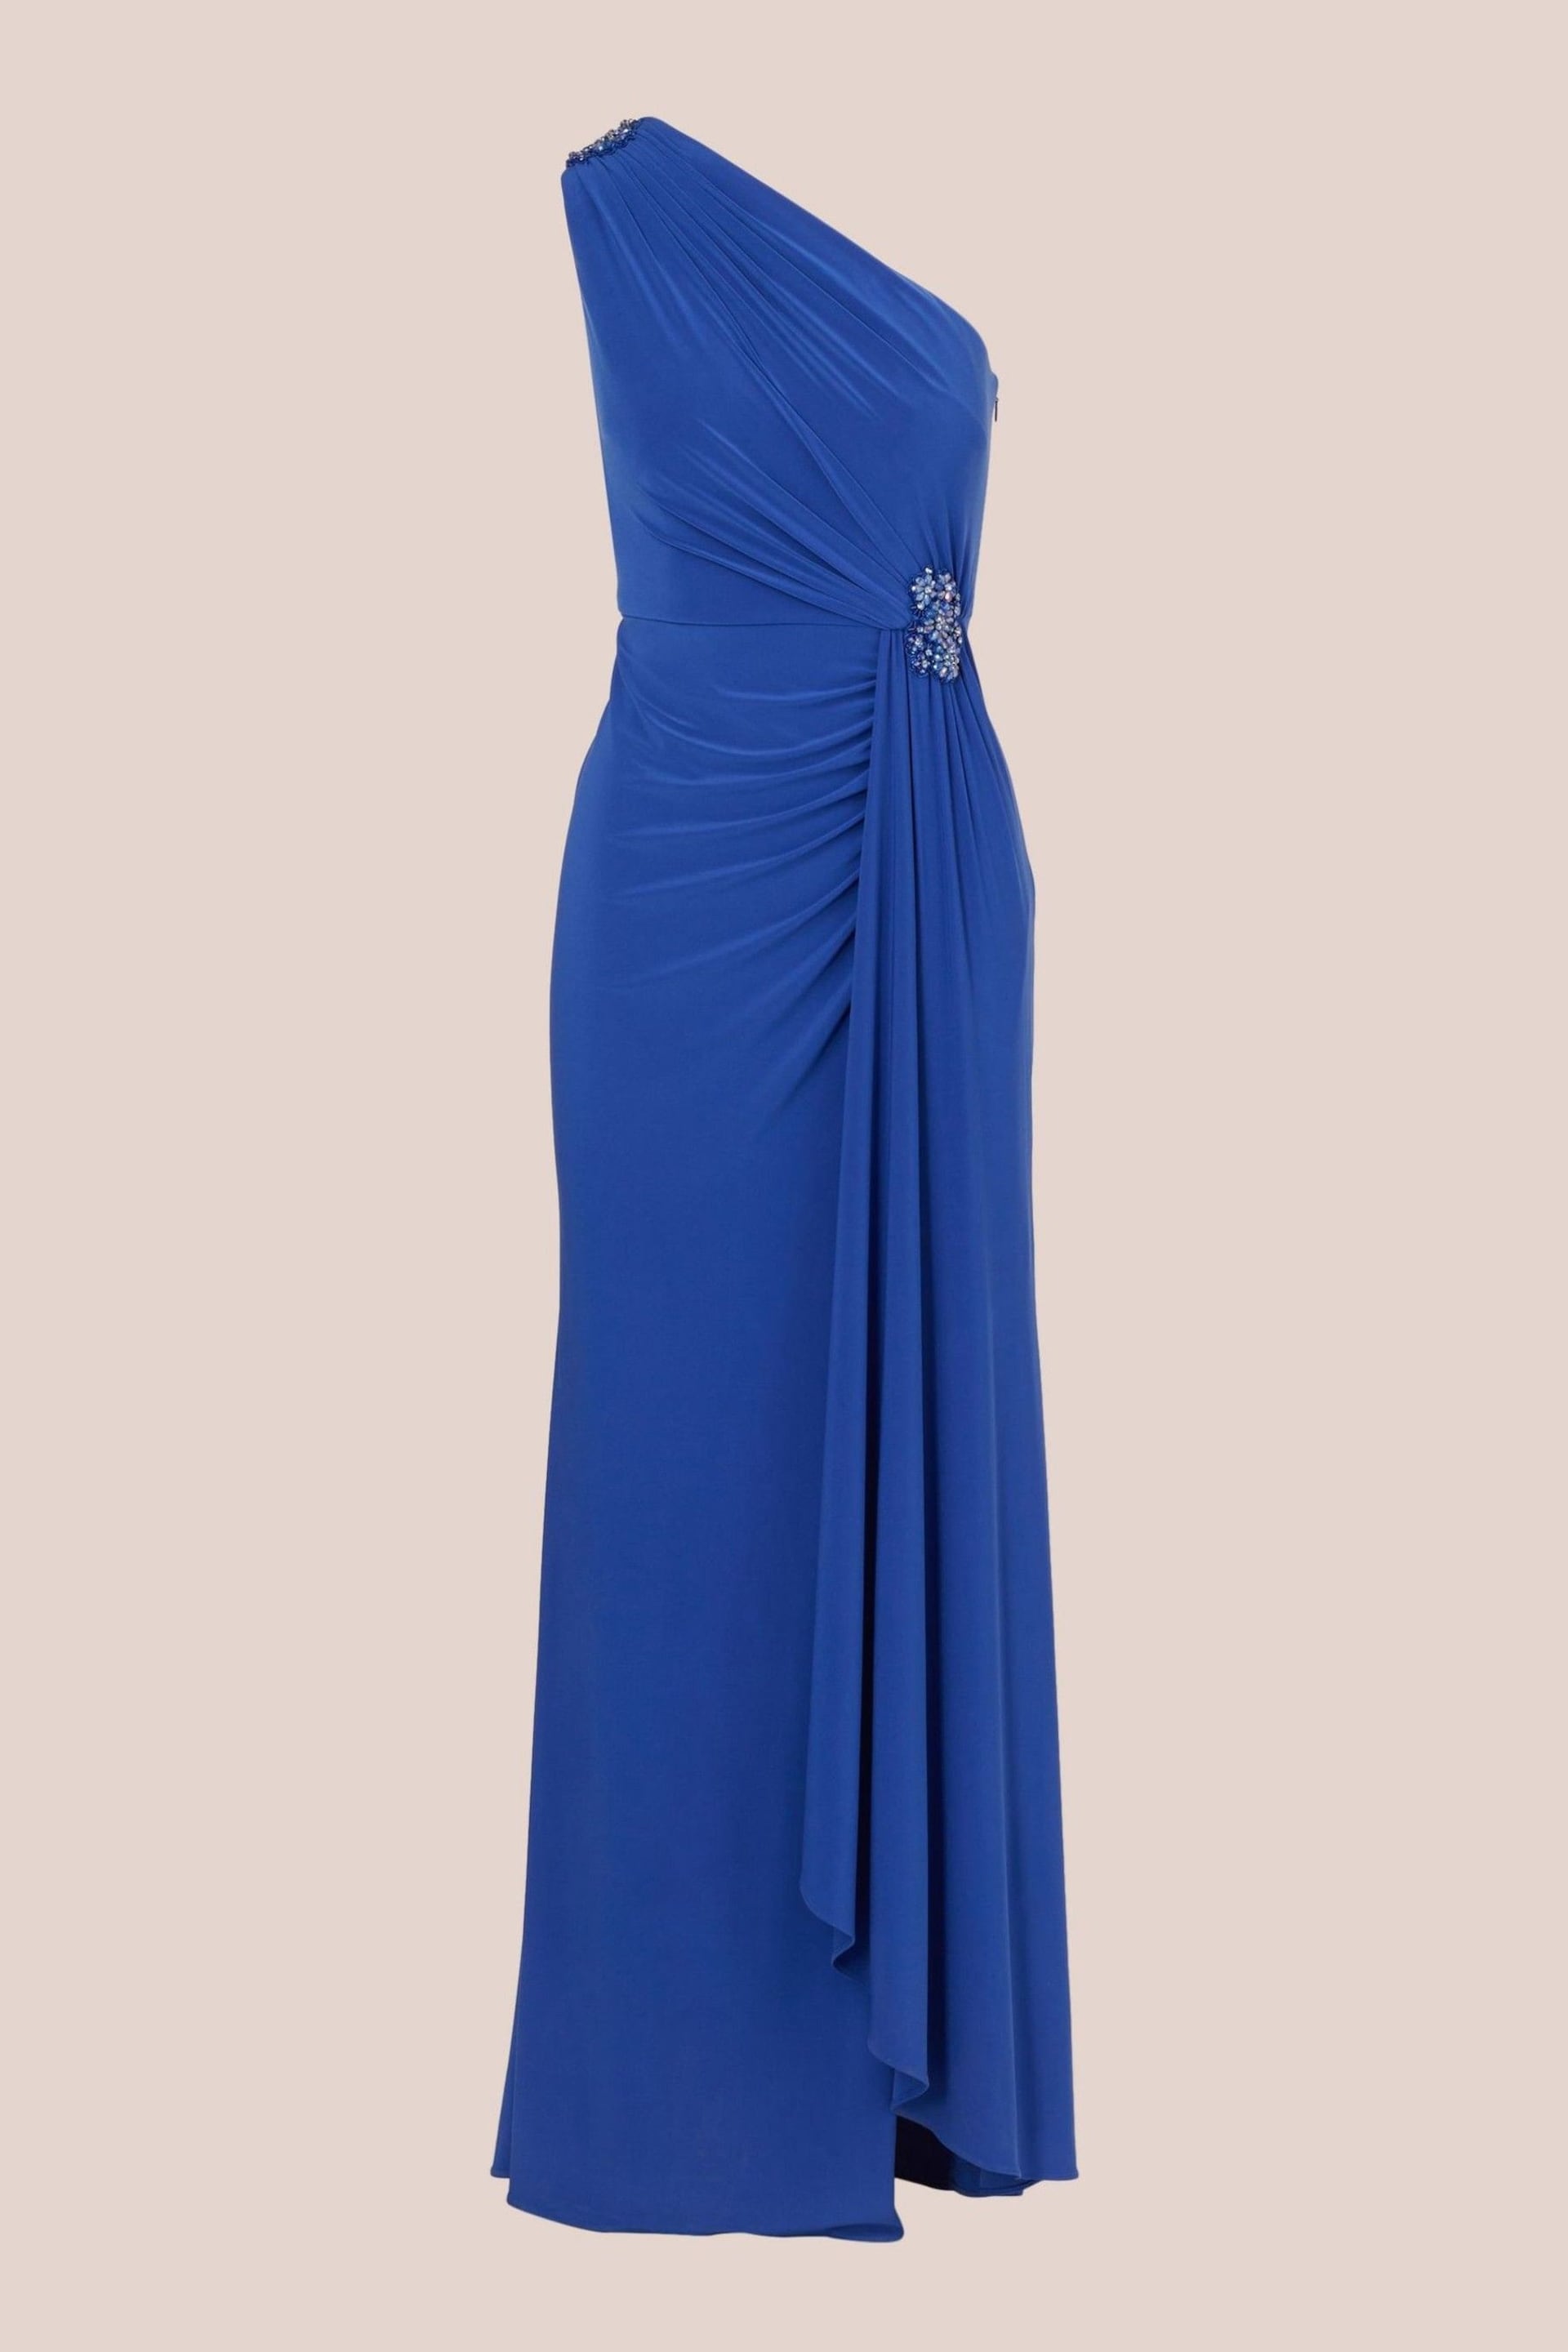 Adrianna Papell Blue Jersey Evening Gown - Image 6 of 7